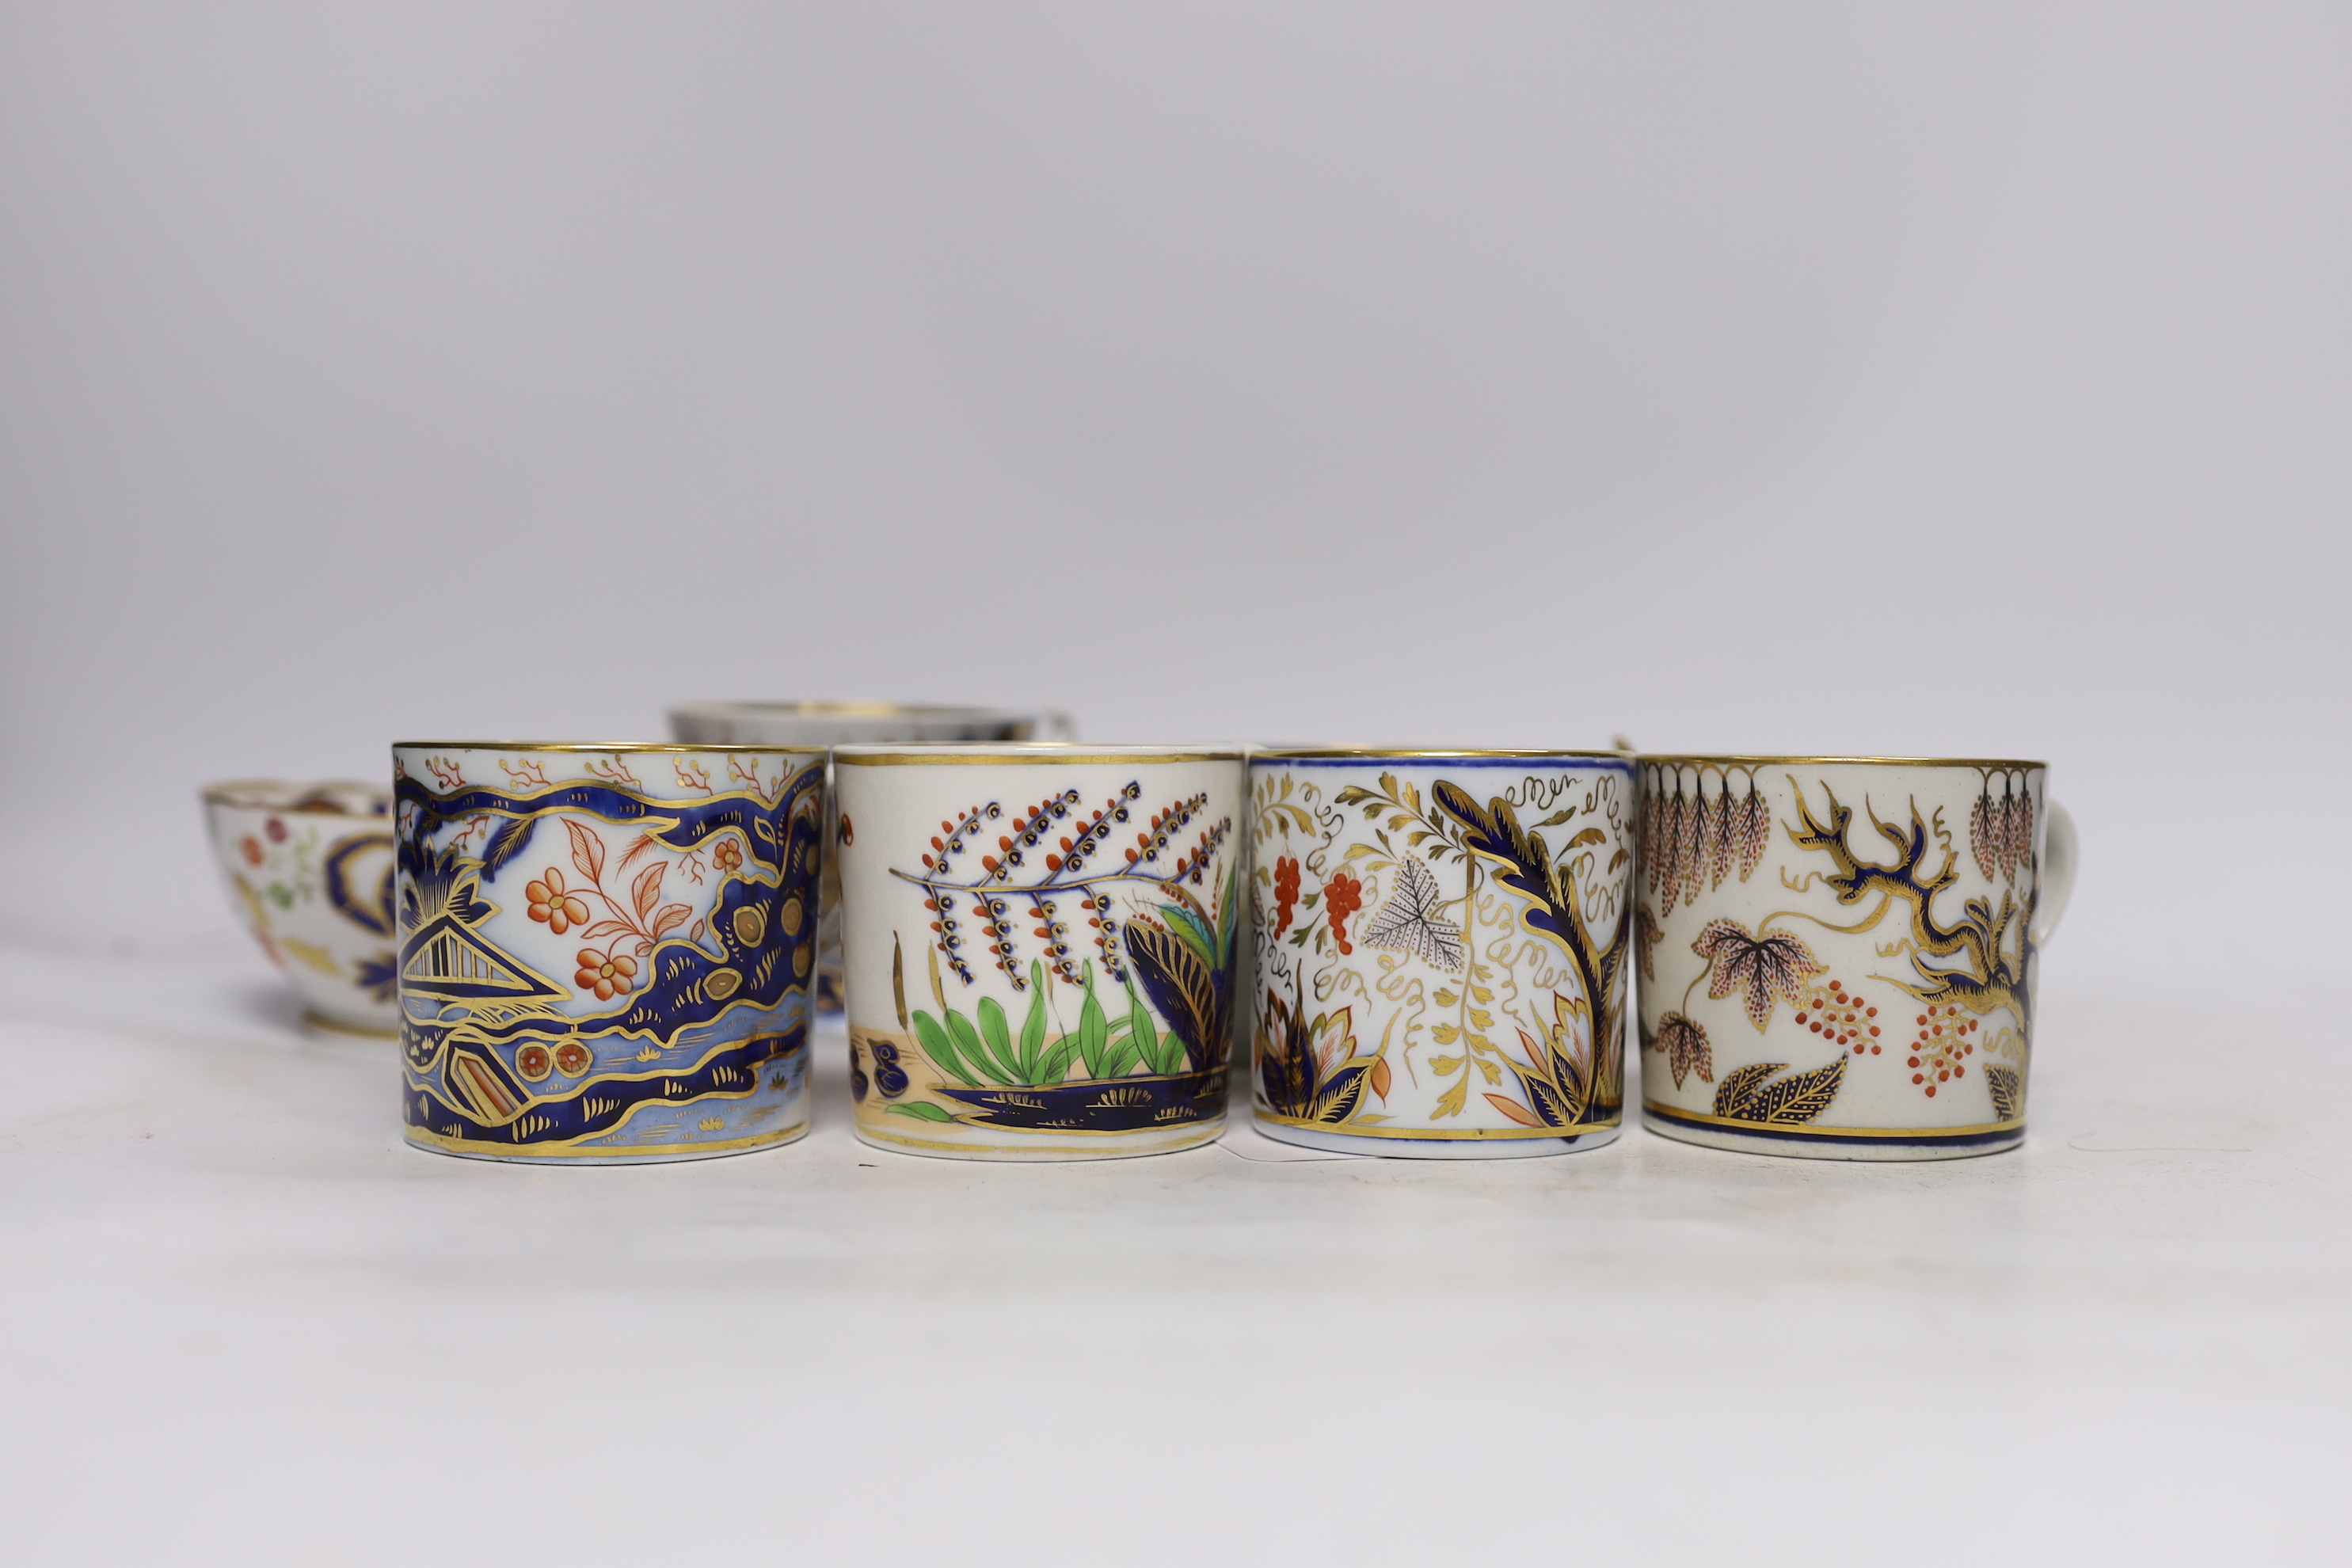 Eleven 1800-1820 English porcelain coffee cans and tea cups, including Imari pattern examples, one with matching saucer